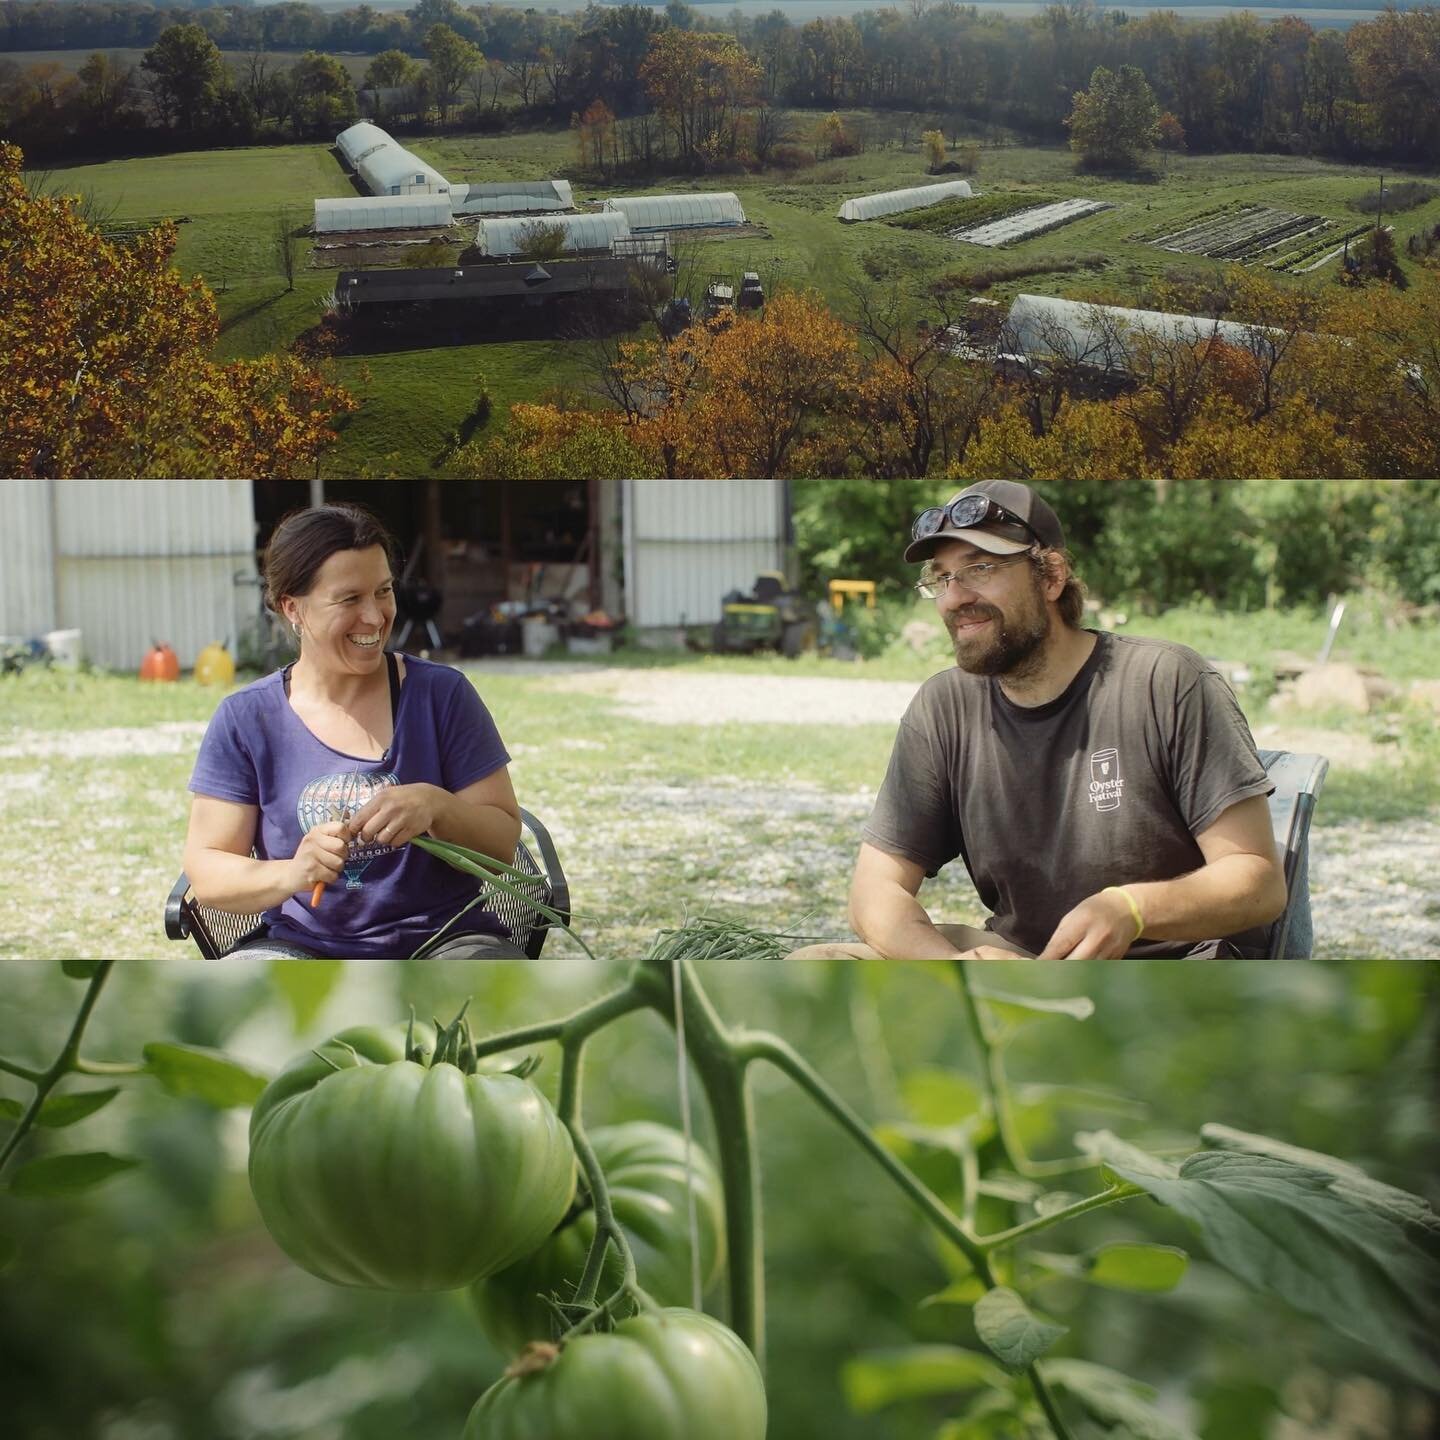 Wow! Our team received FIVE Emmy nominations in our region this awards season - including Best Documentary for More Than Corn, No Limits: An Arts Series Focused on Access for All, and IMBPREZ.

We&rsquo;re honored to receive these nominations and gra